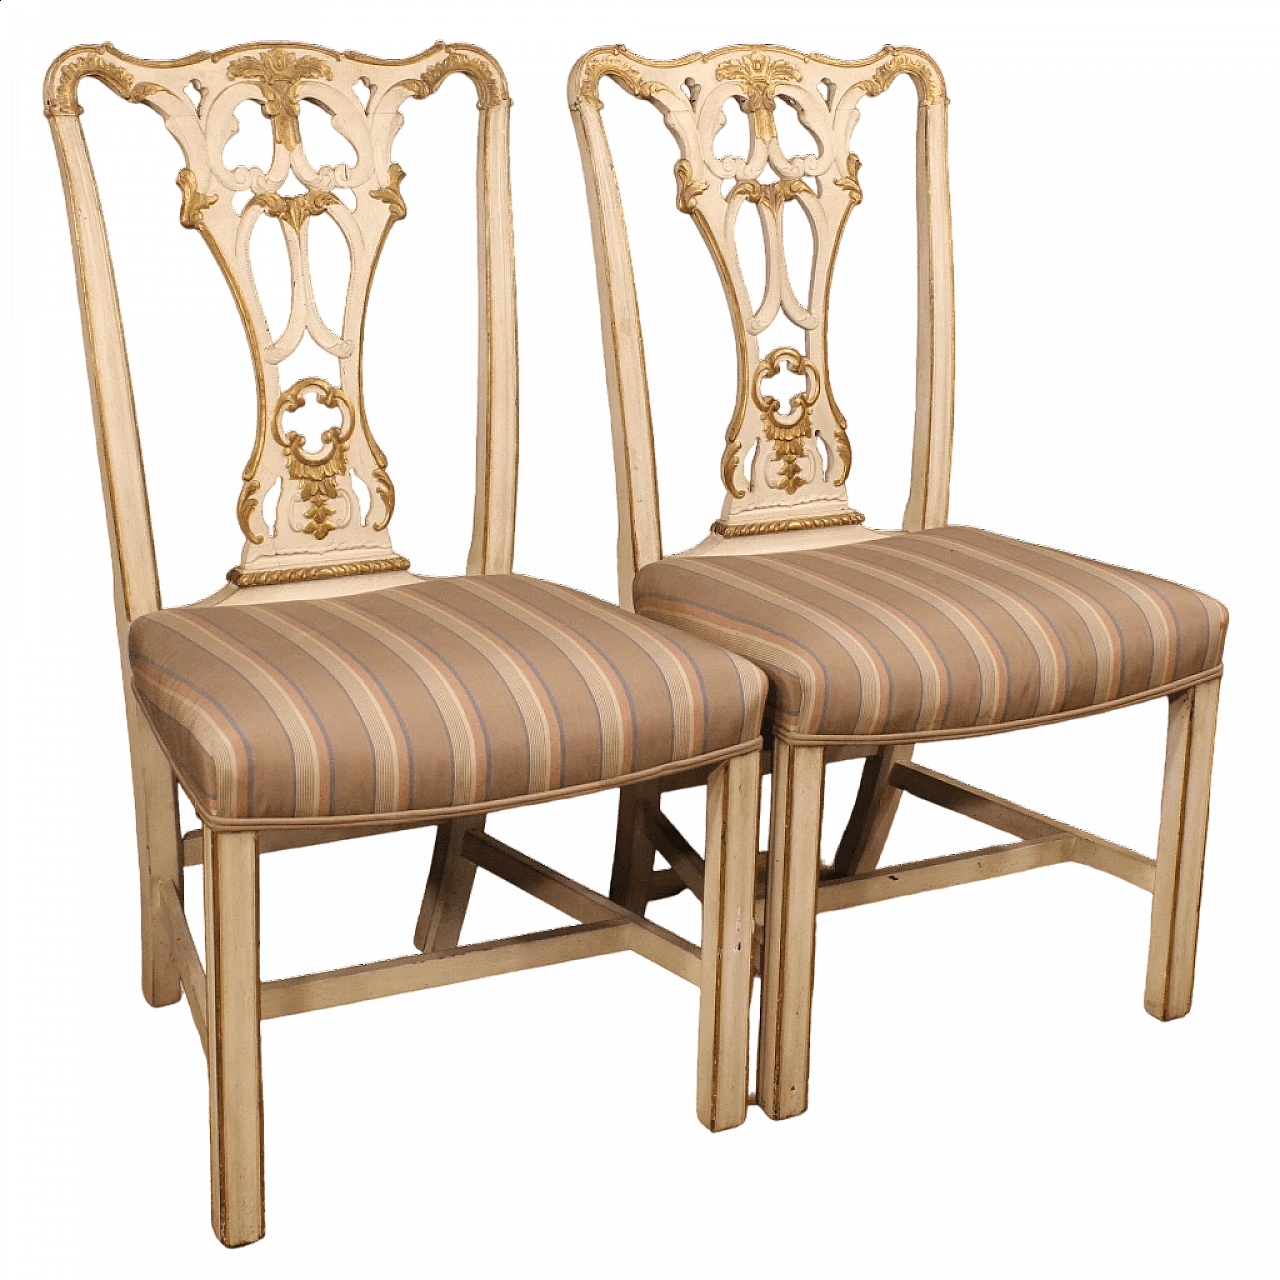 Pair of lacquered and gilded wood padded chairs 13